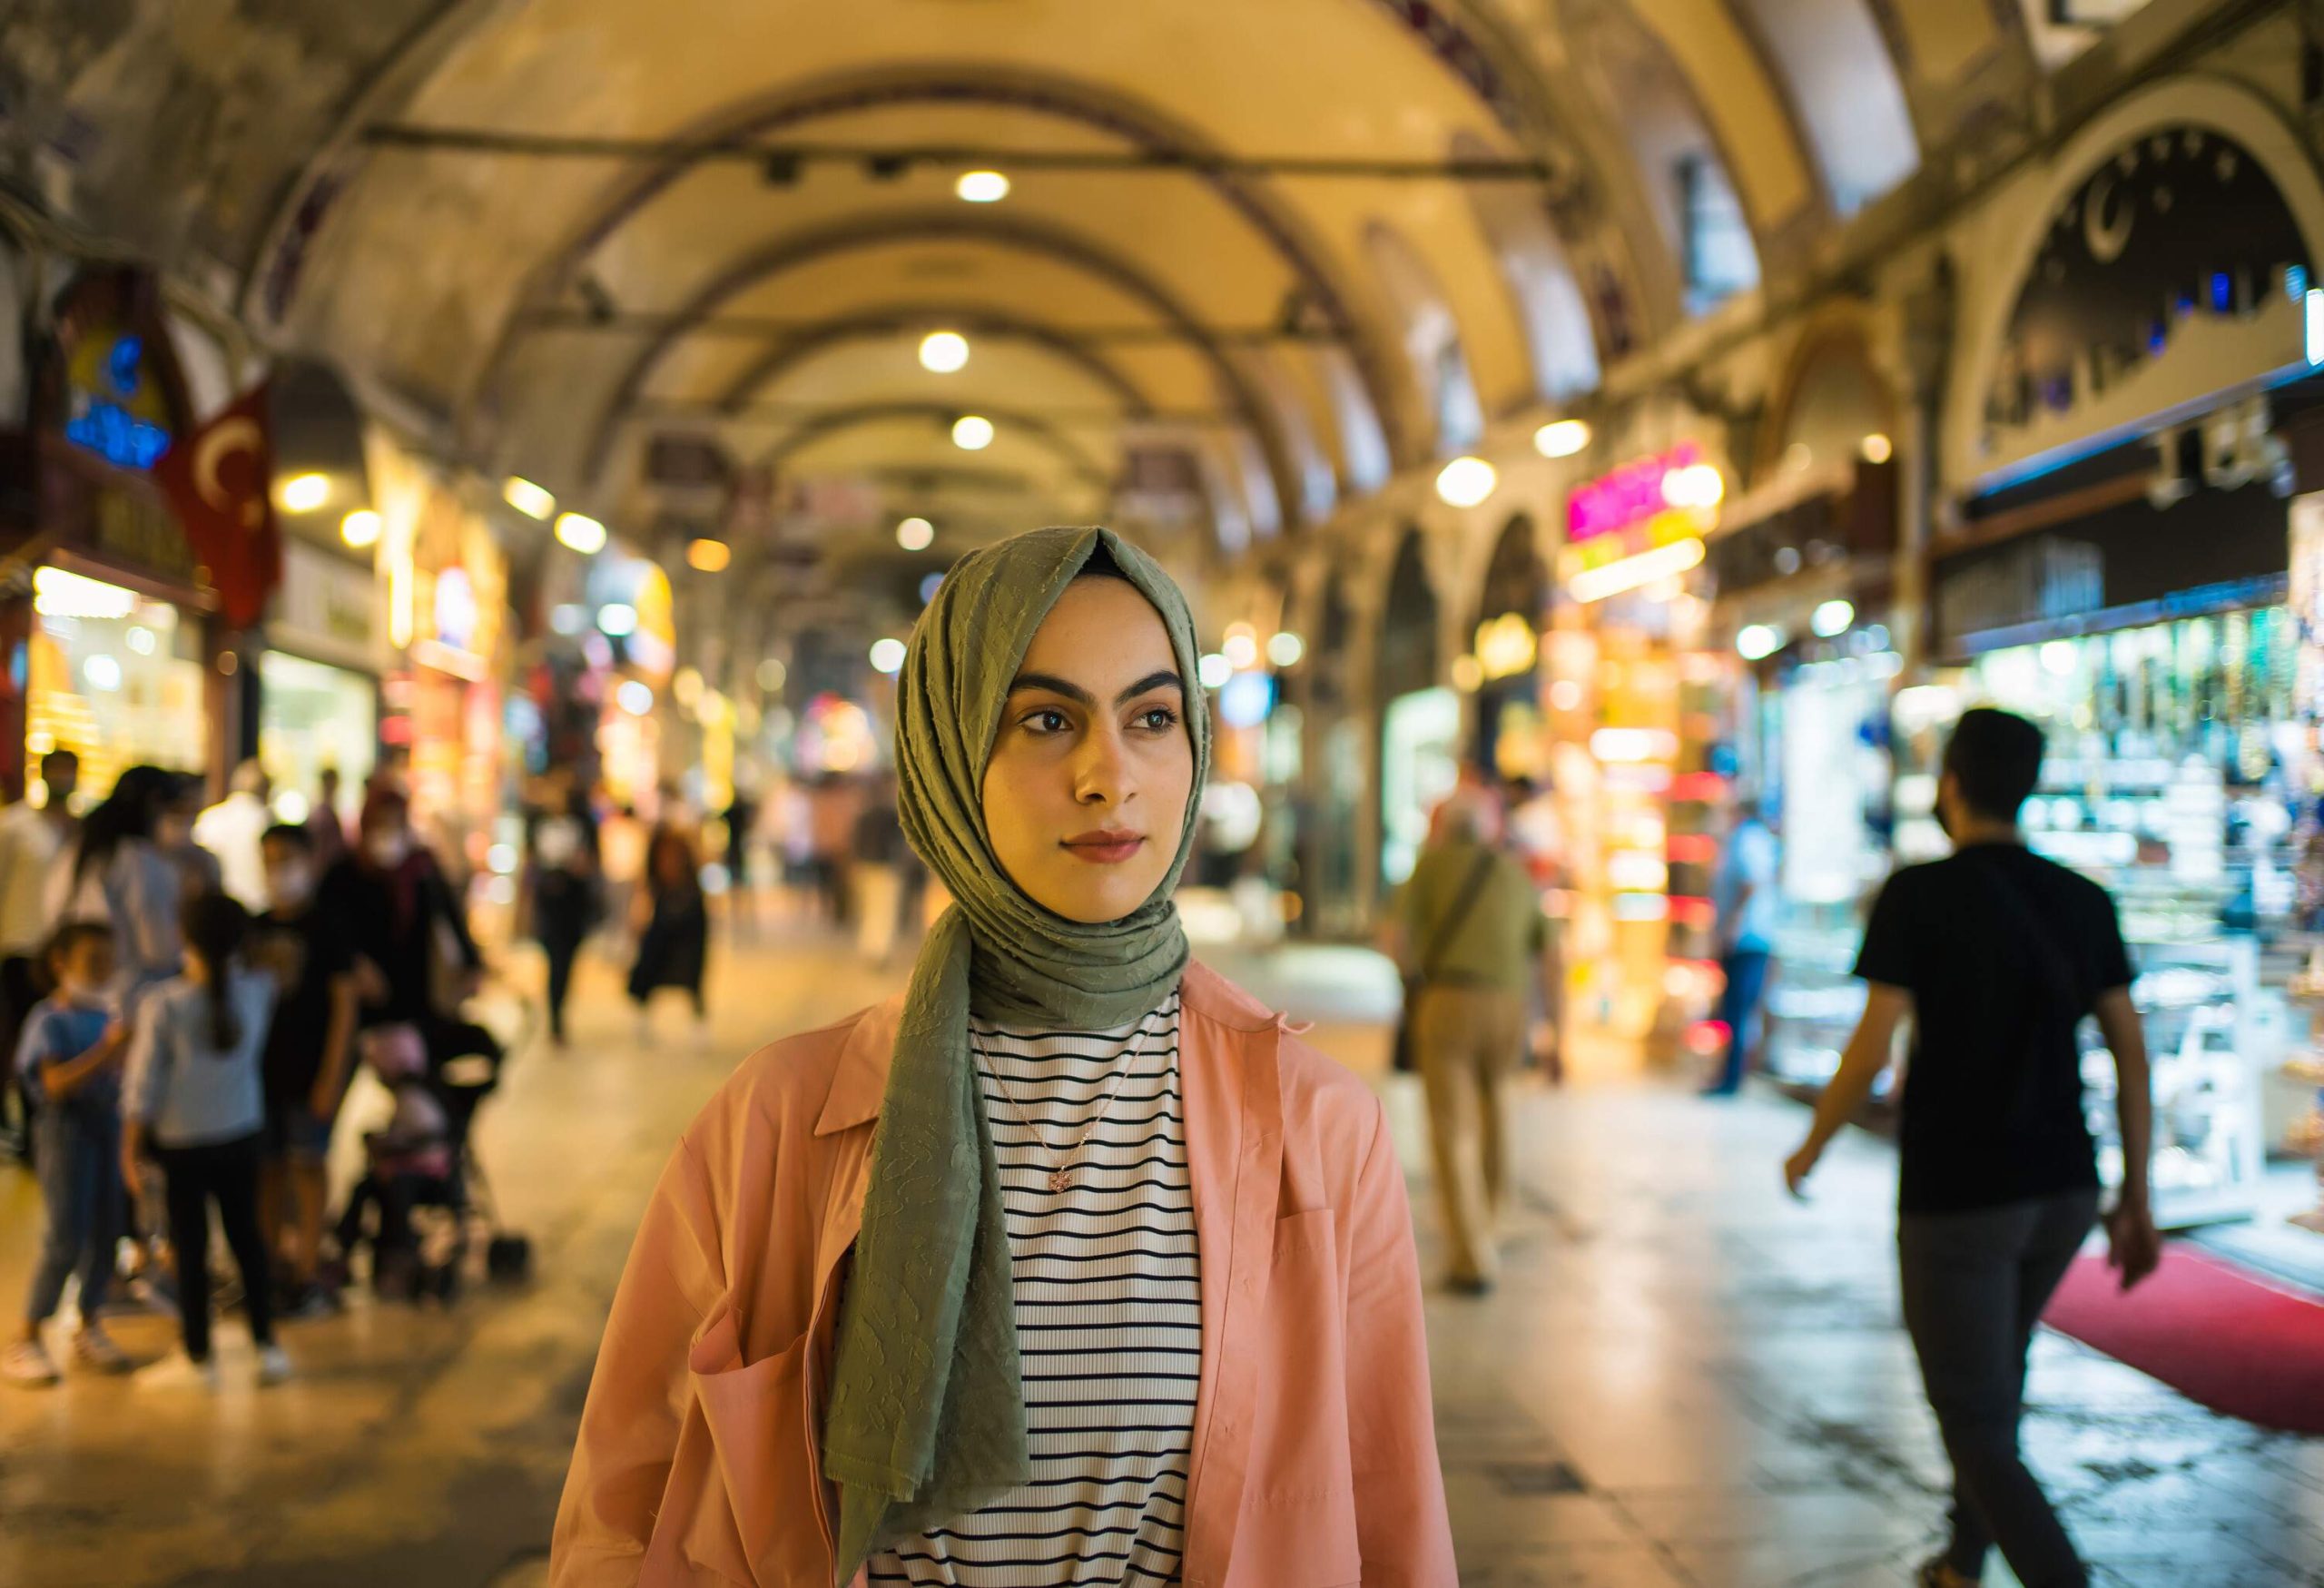 A woman in hijab against the bokeh background of a colourful indoor market.